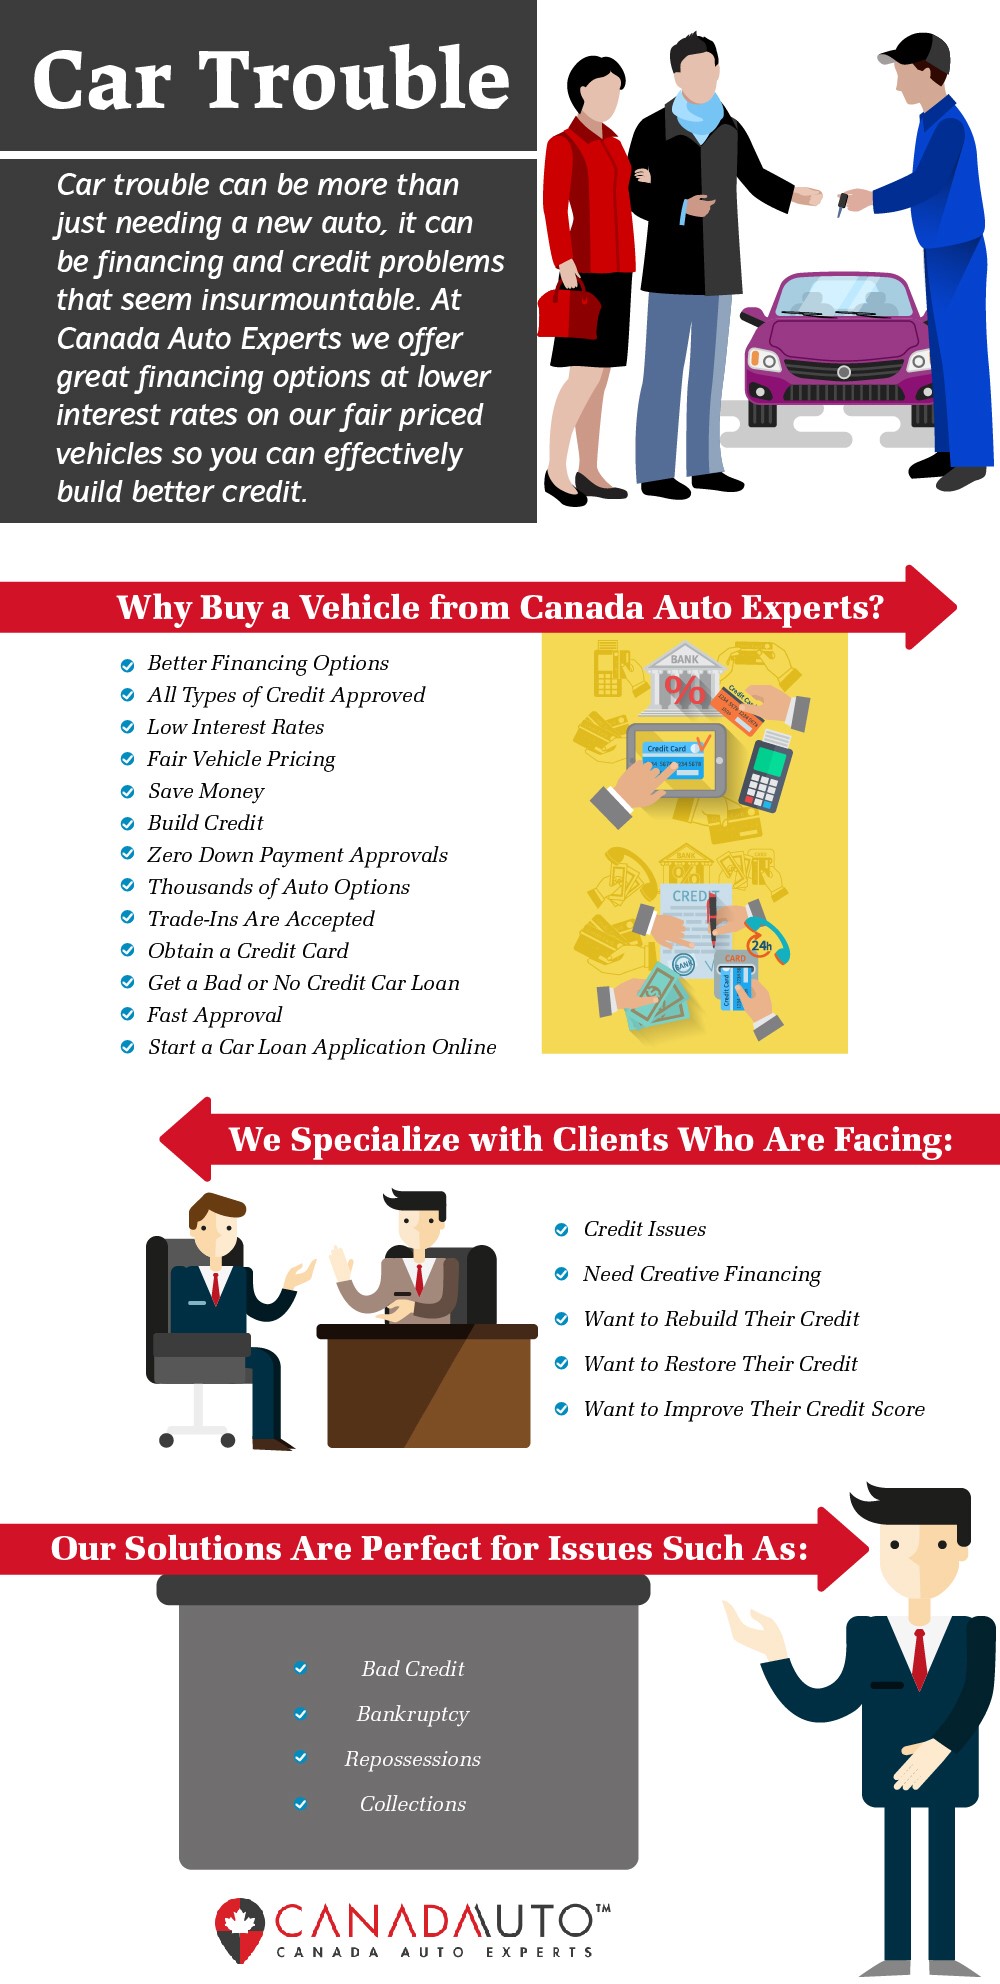 Reasons to Buy a Vehicle from Canada Auto Experts